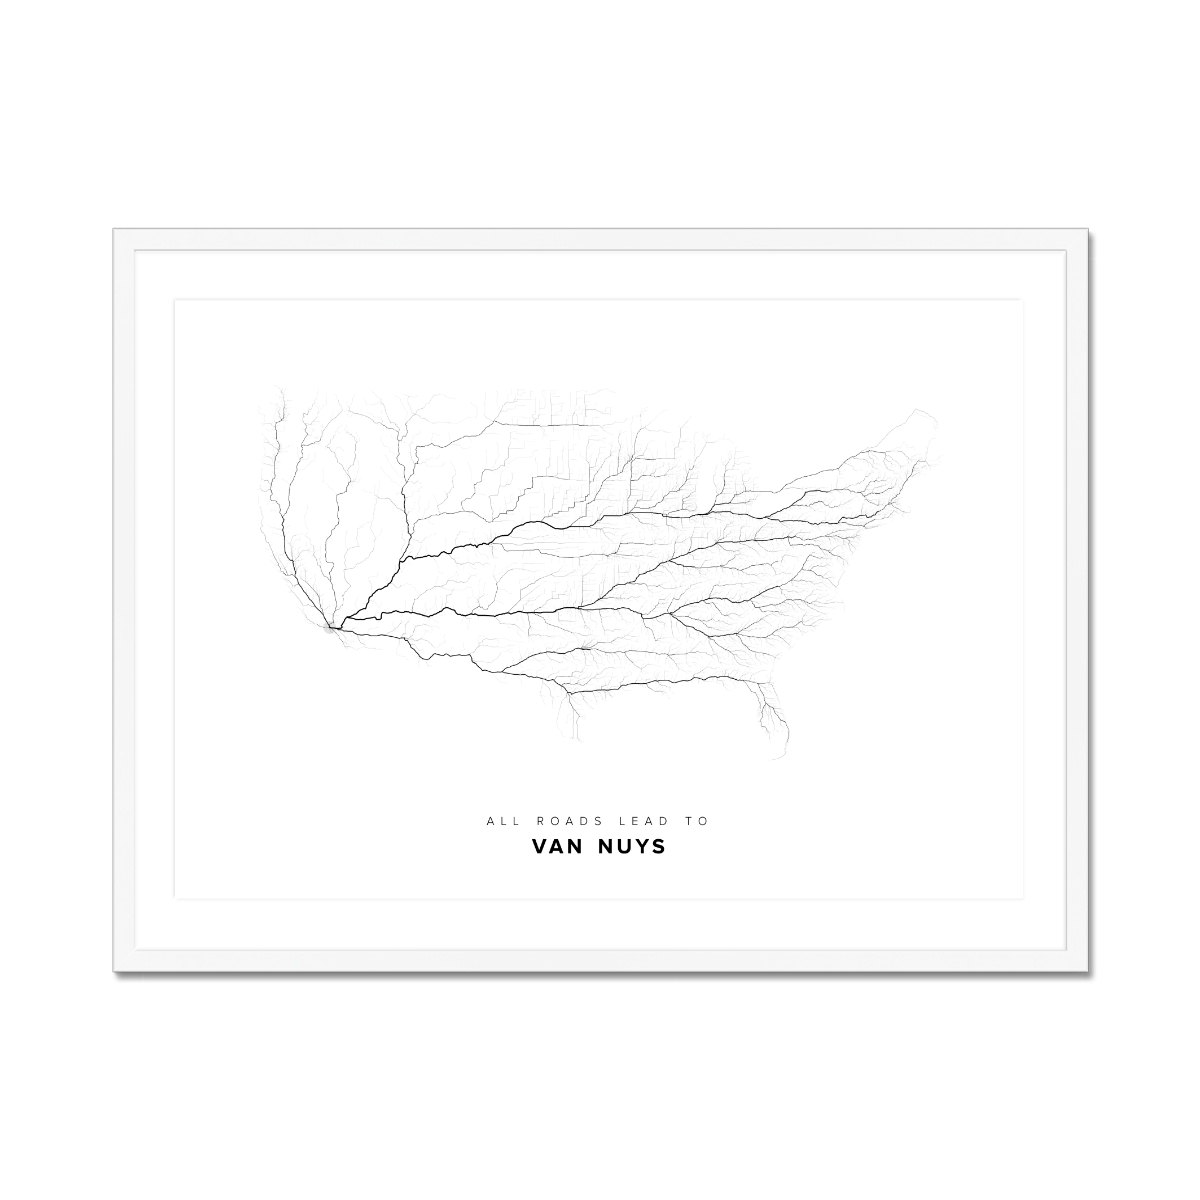 All roads lead to Van Nuys (United States of America) Fine Art Map Print